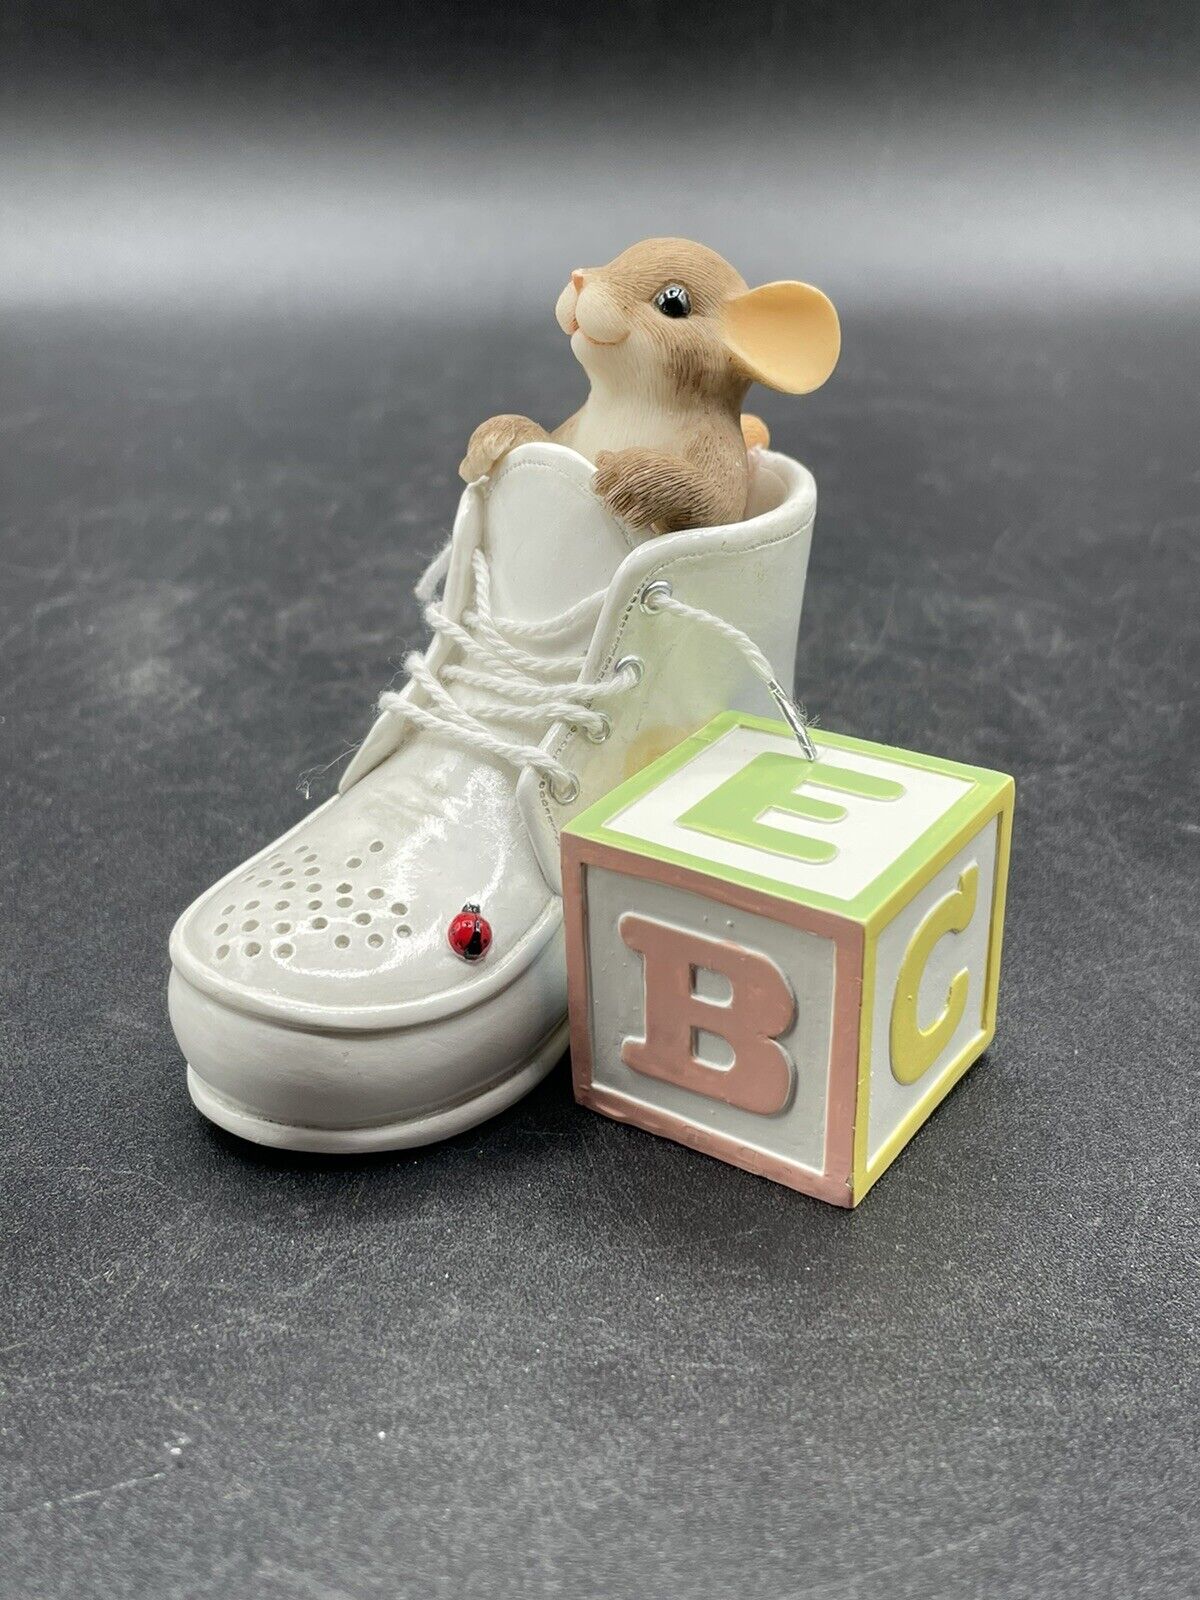 Charming Tails A NEW LITTLE SOLE DEAN GRIFF BABY SHOE BLOCK Ladybug Mouse